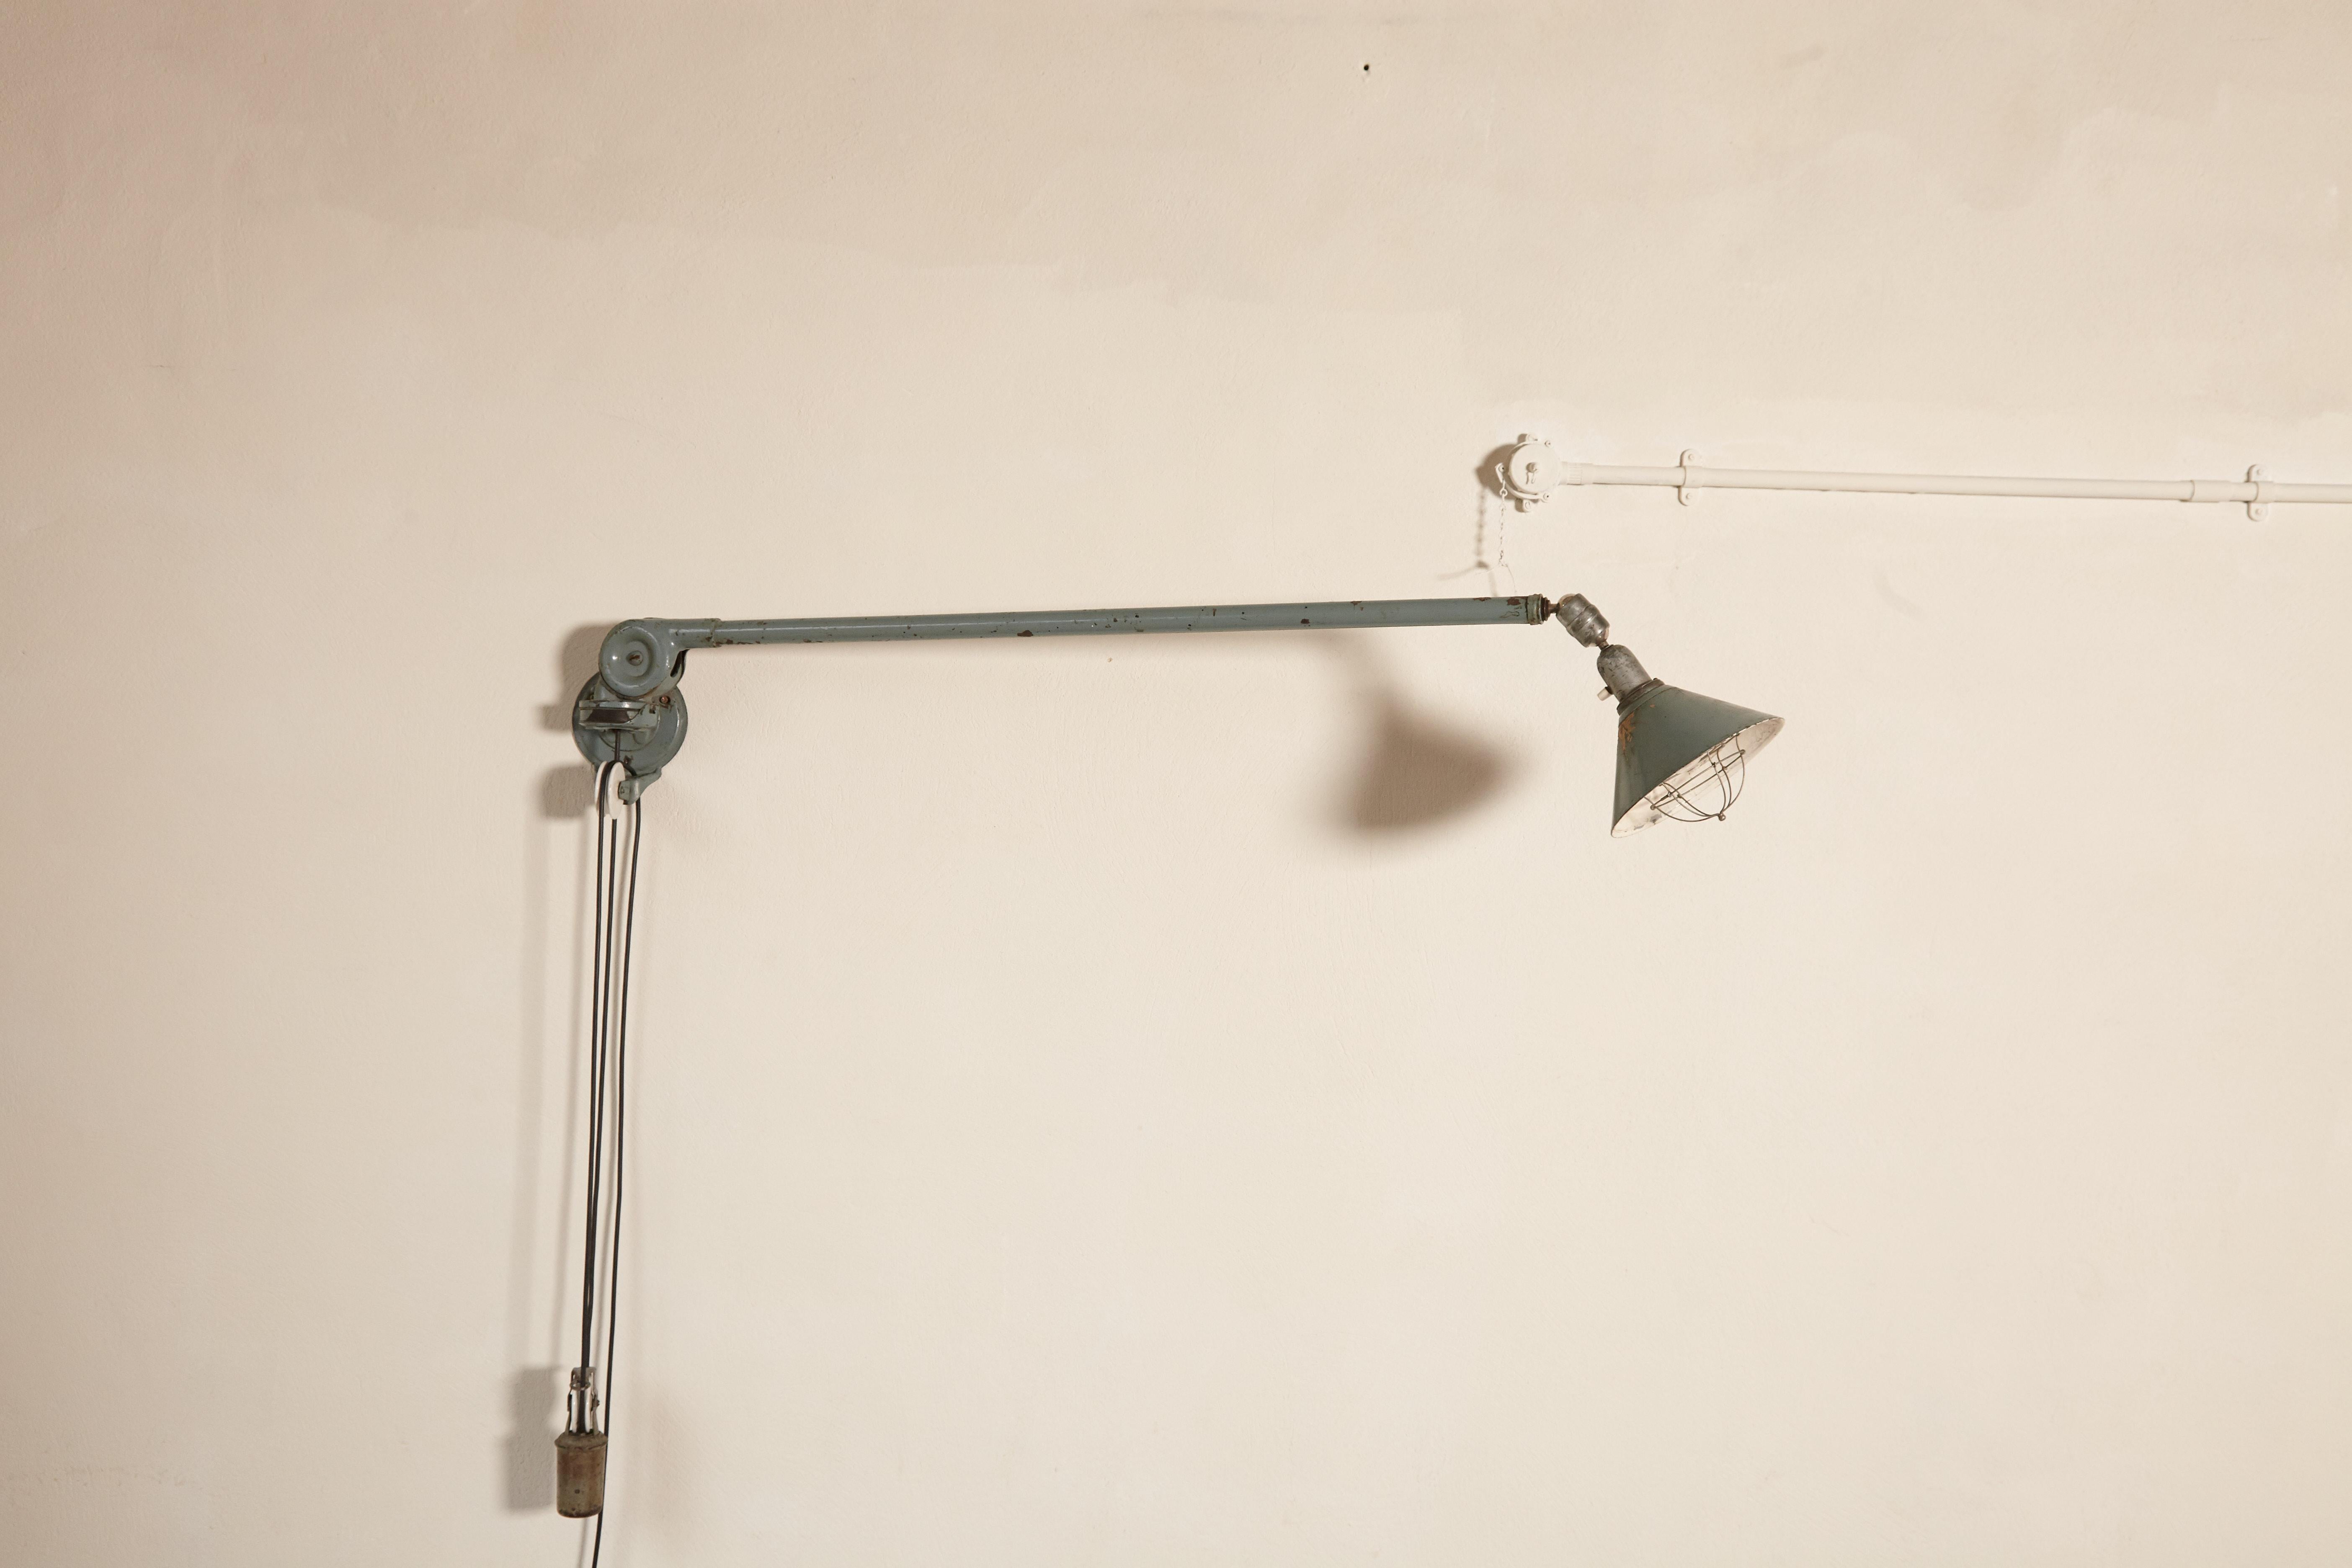 A rare early Johan Petter Johansson Industrial triplex telescopic lamp, with counterweight, Sweden, circa 1910s. Can be wall, floor or ceiling hung. Extends up to 300cm. Adjustable in many directions. Nice original condition - with some marks, paint